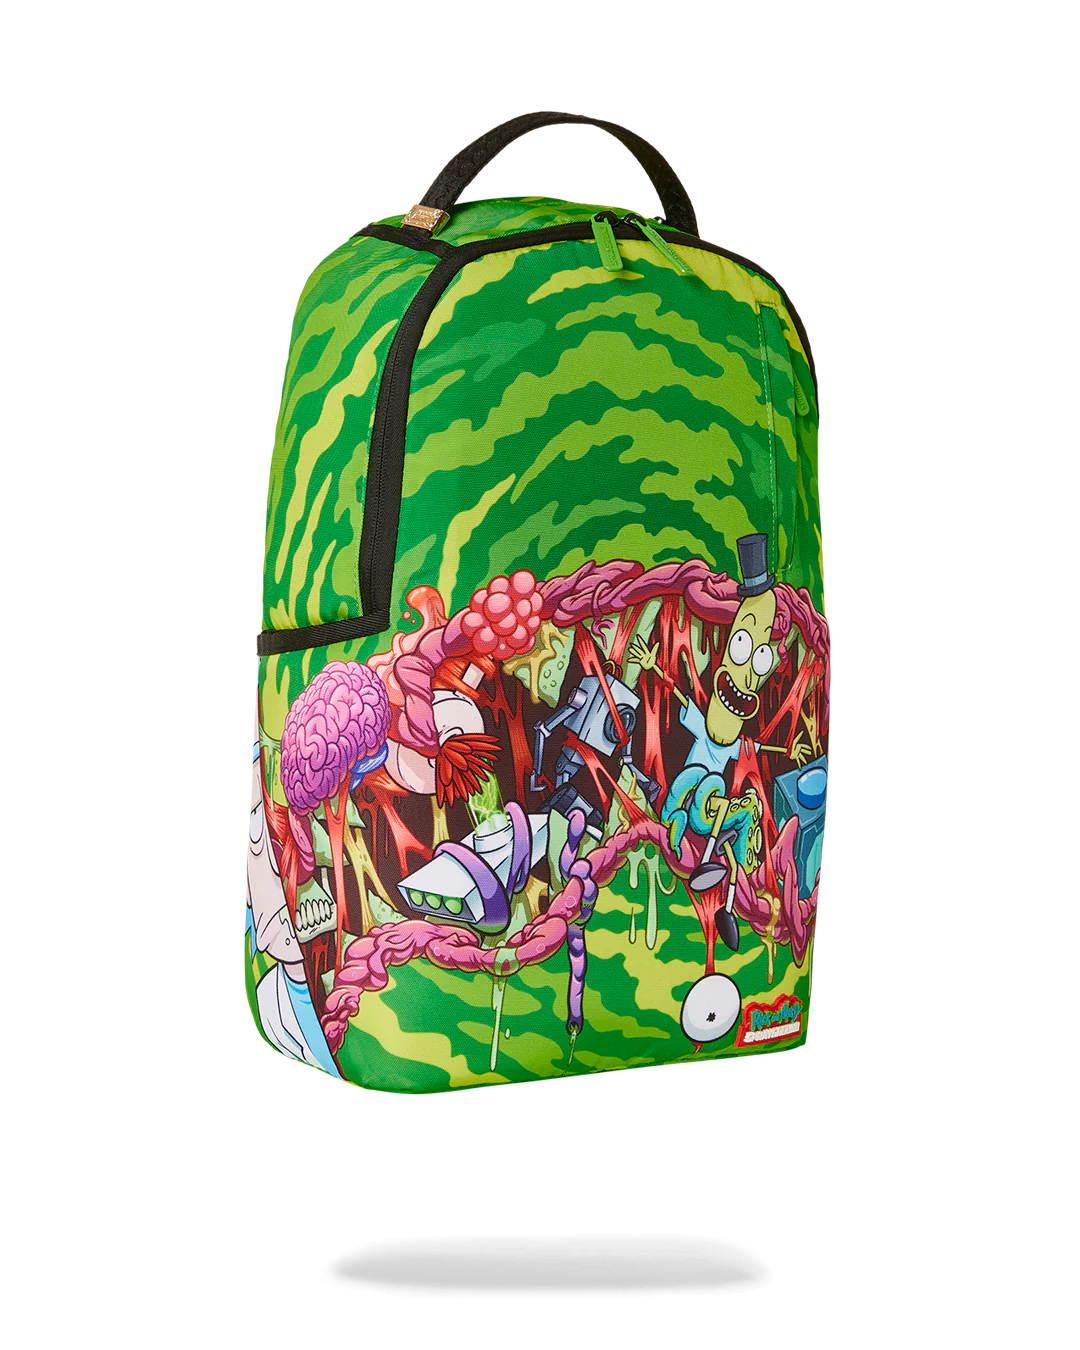  Sprayground Backpack Rick And Morty